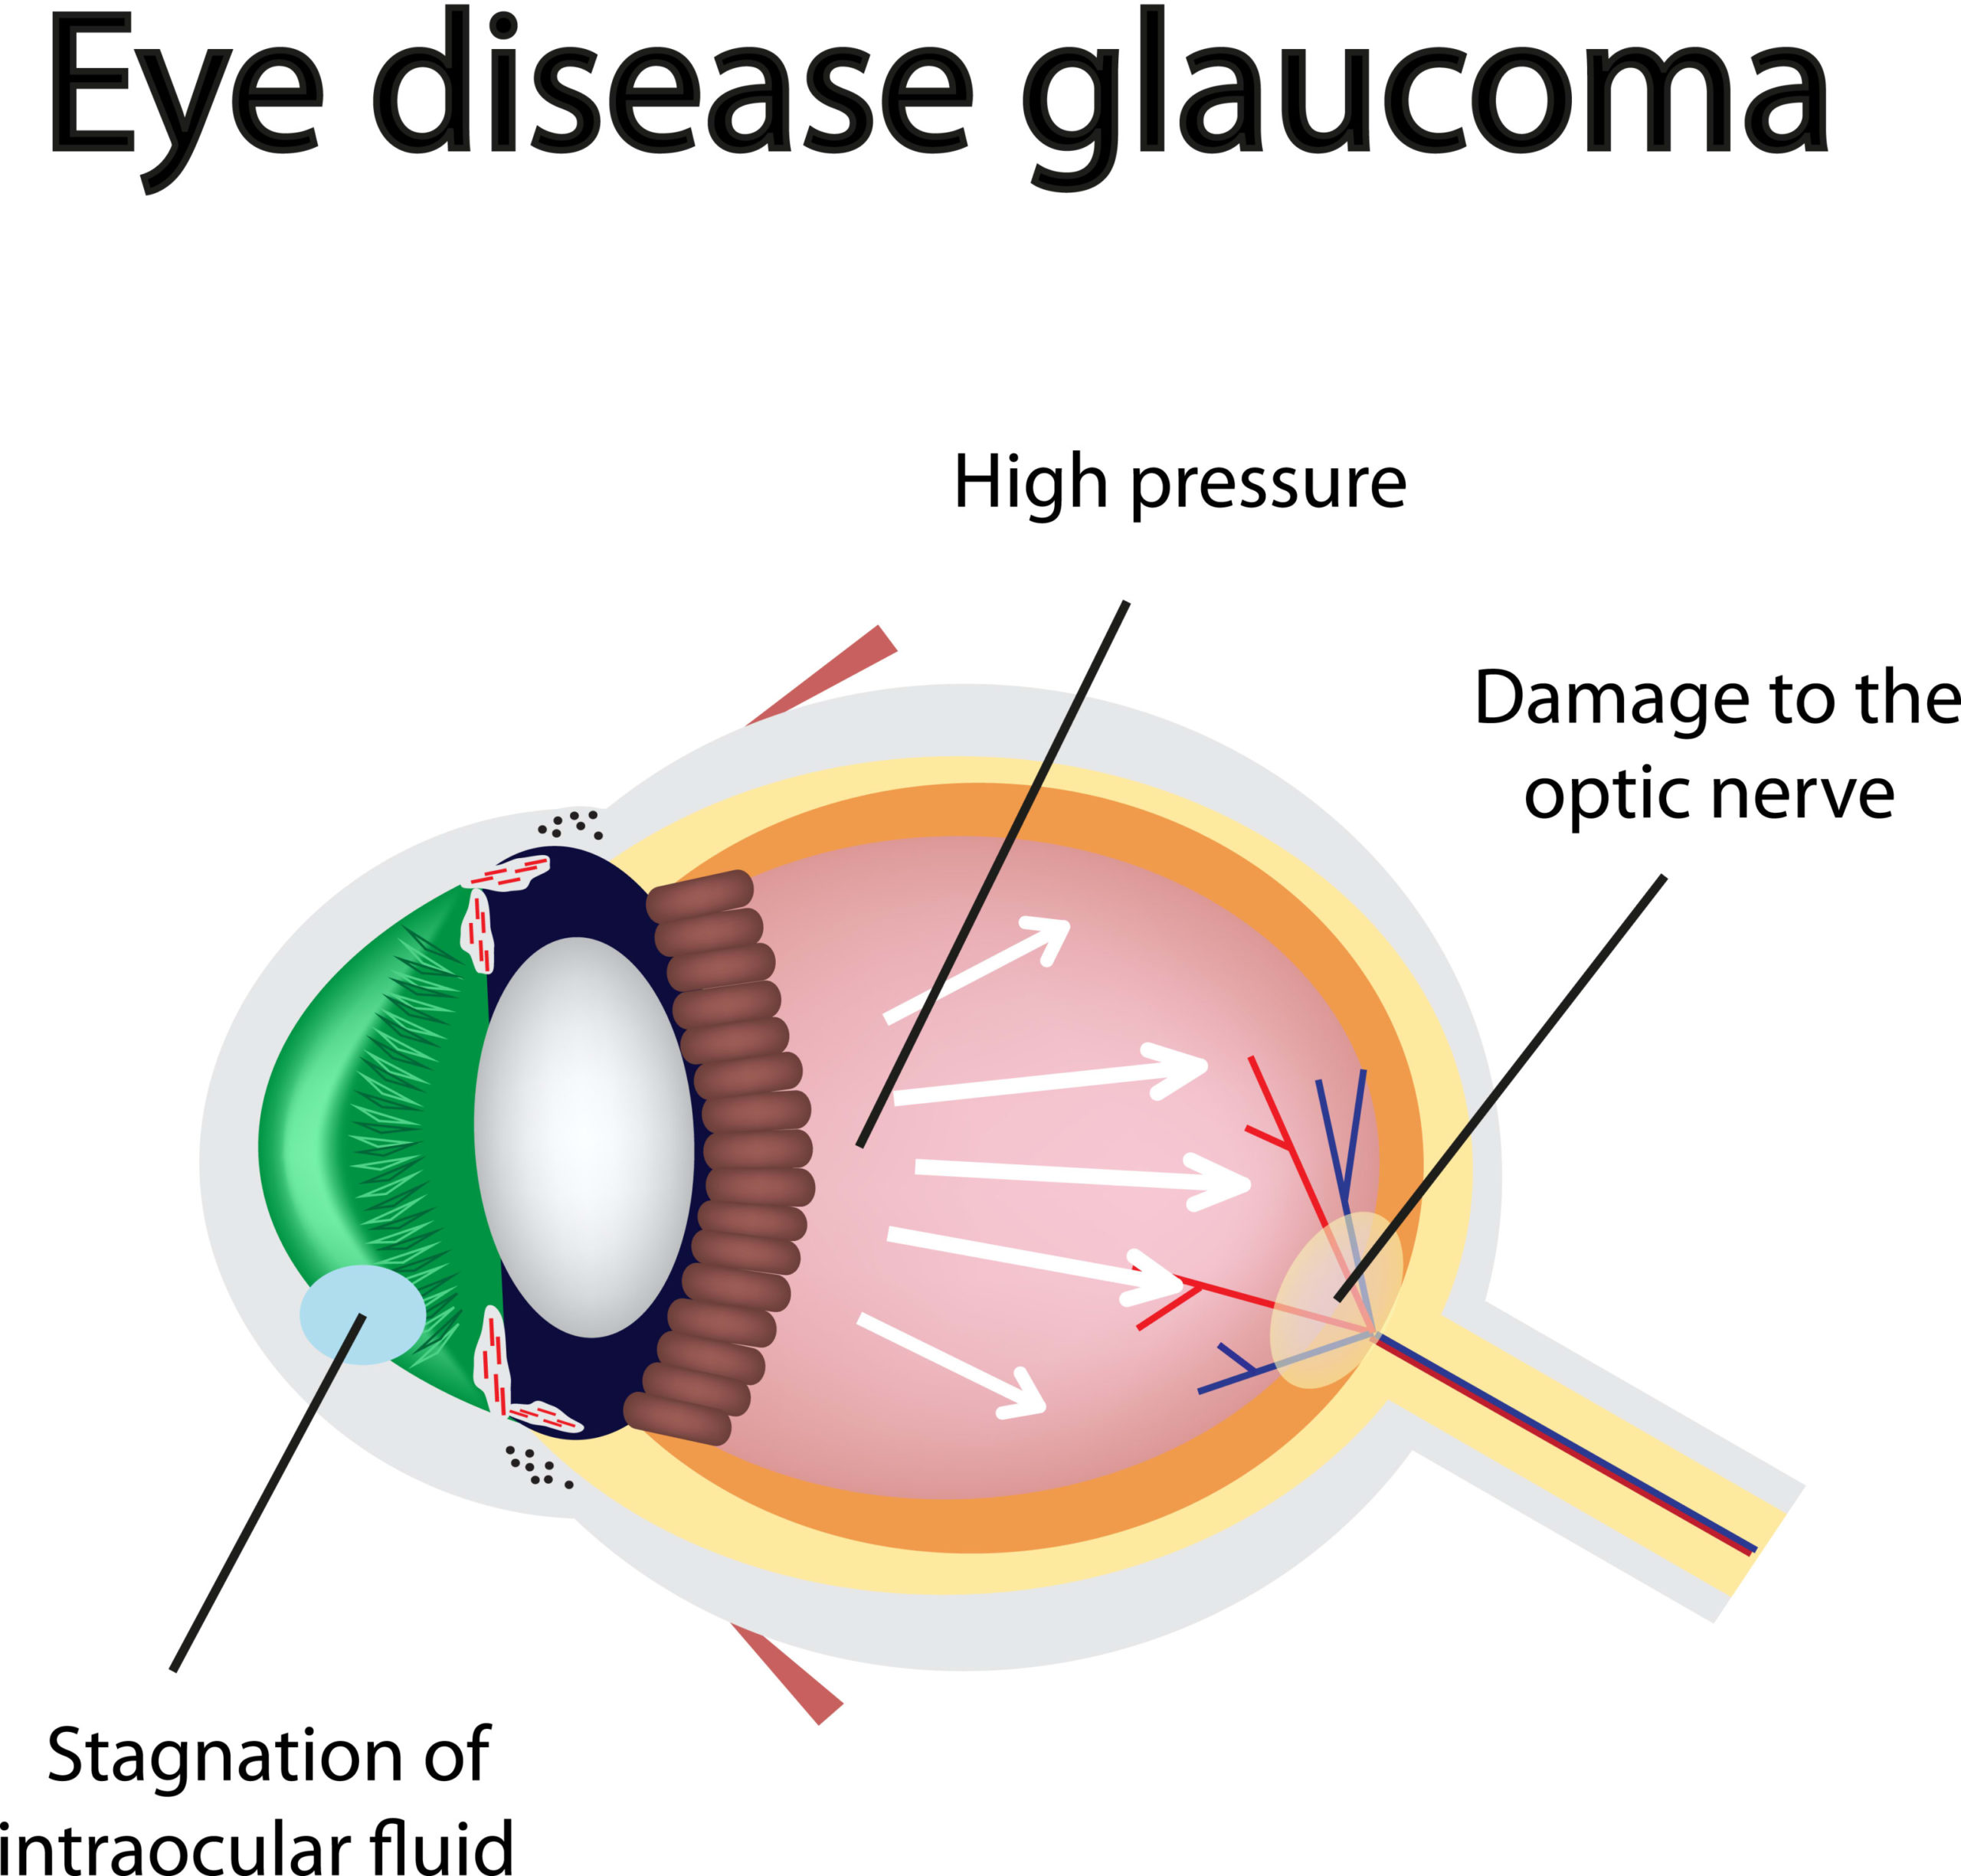 Diagram of an eye with glaucoma